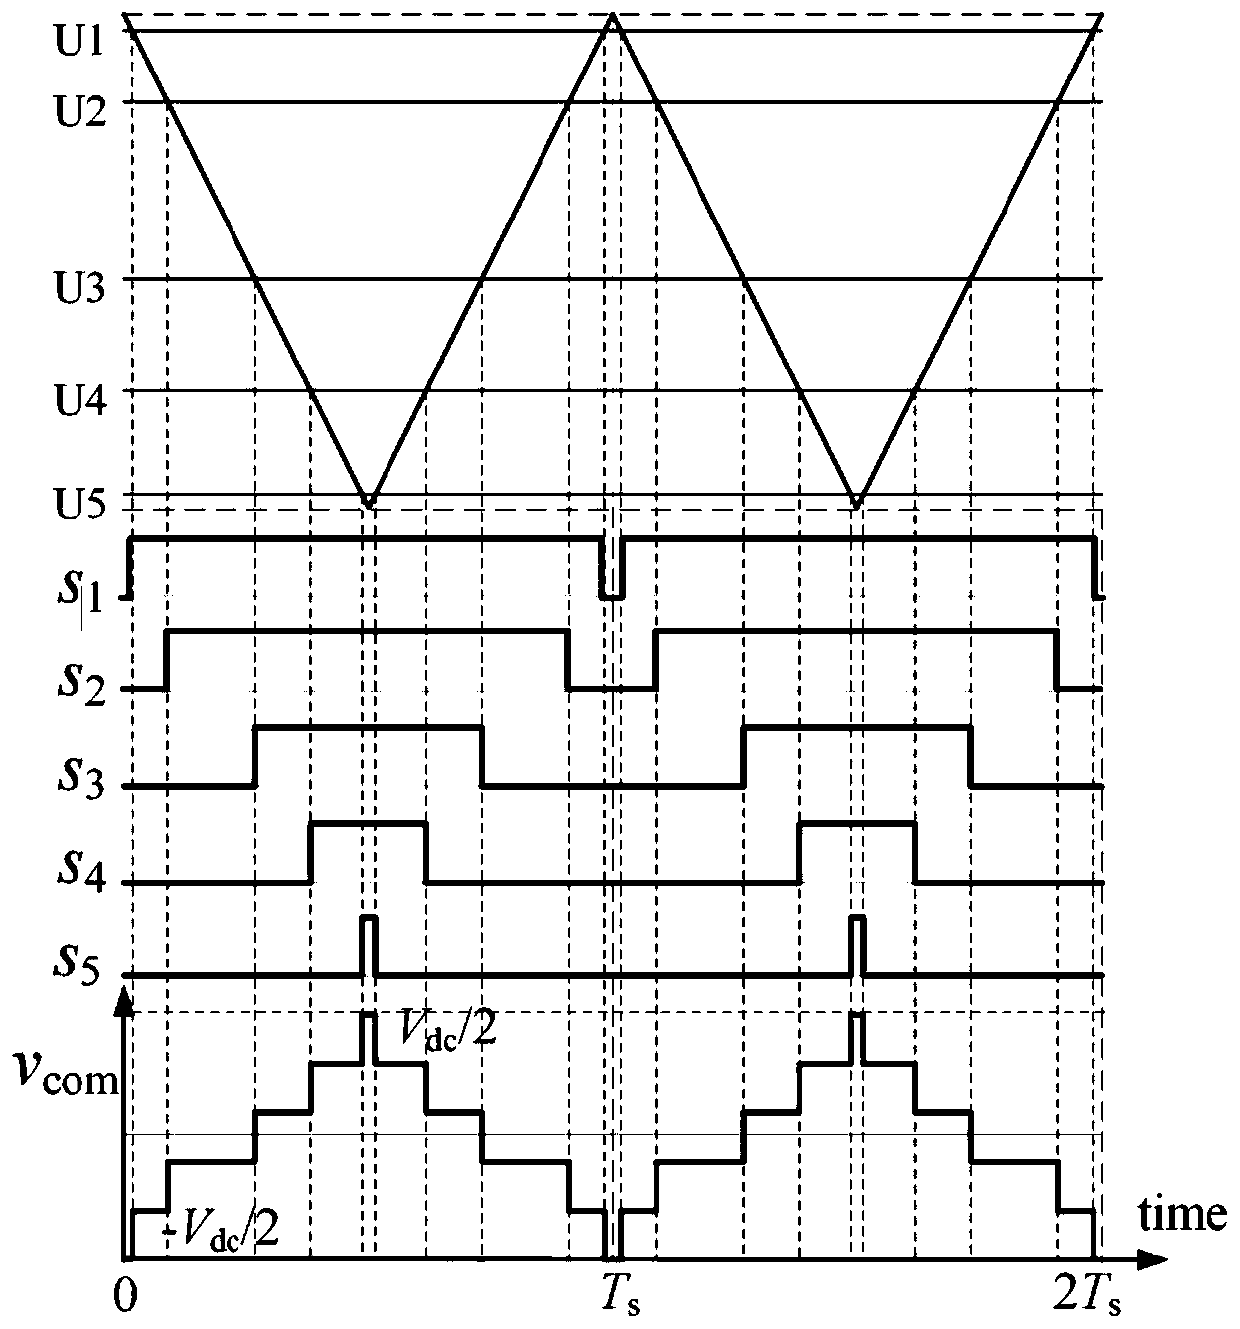 A Sawtooth Carrier PWM Modulation Method for Symmetrical Odd Phase Two-Level Inverter